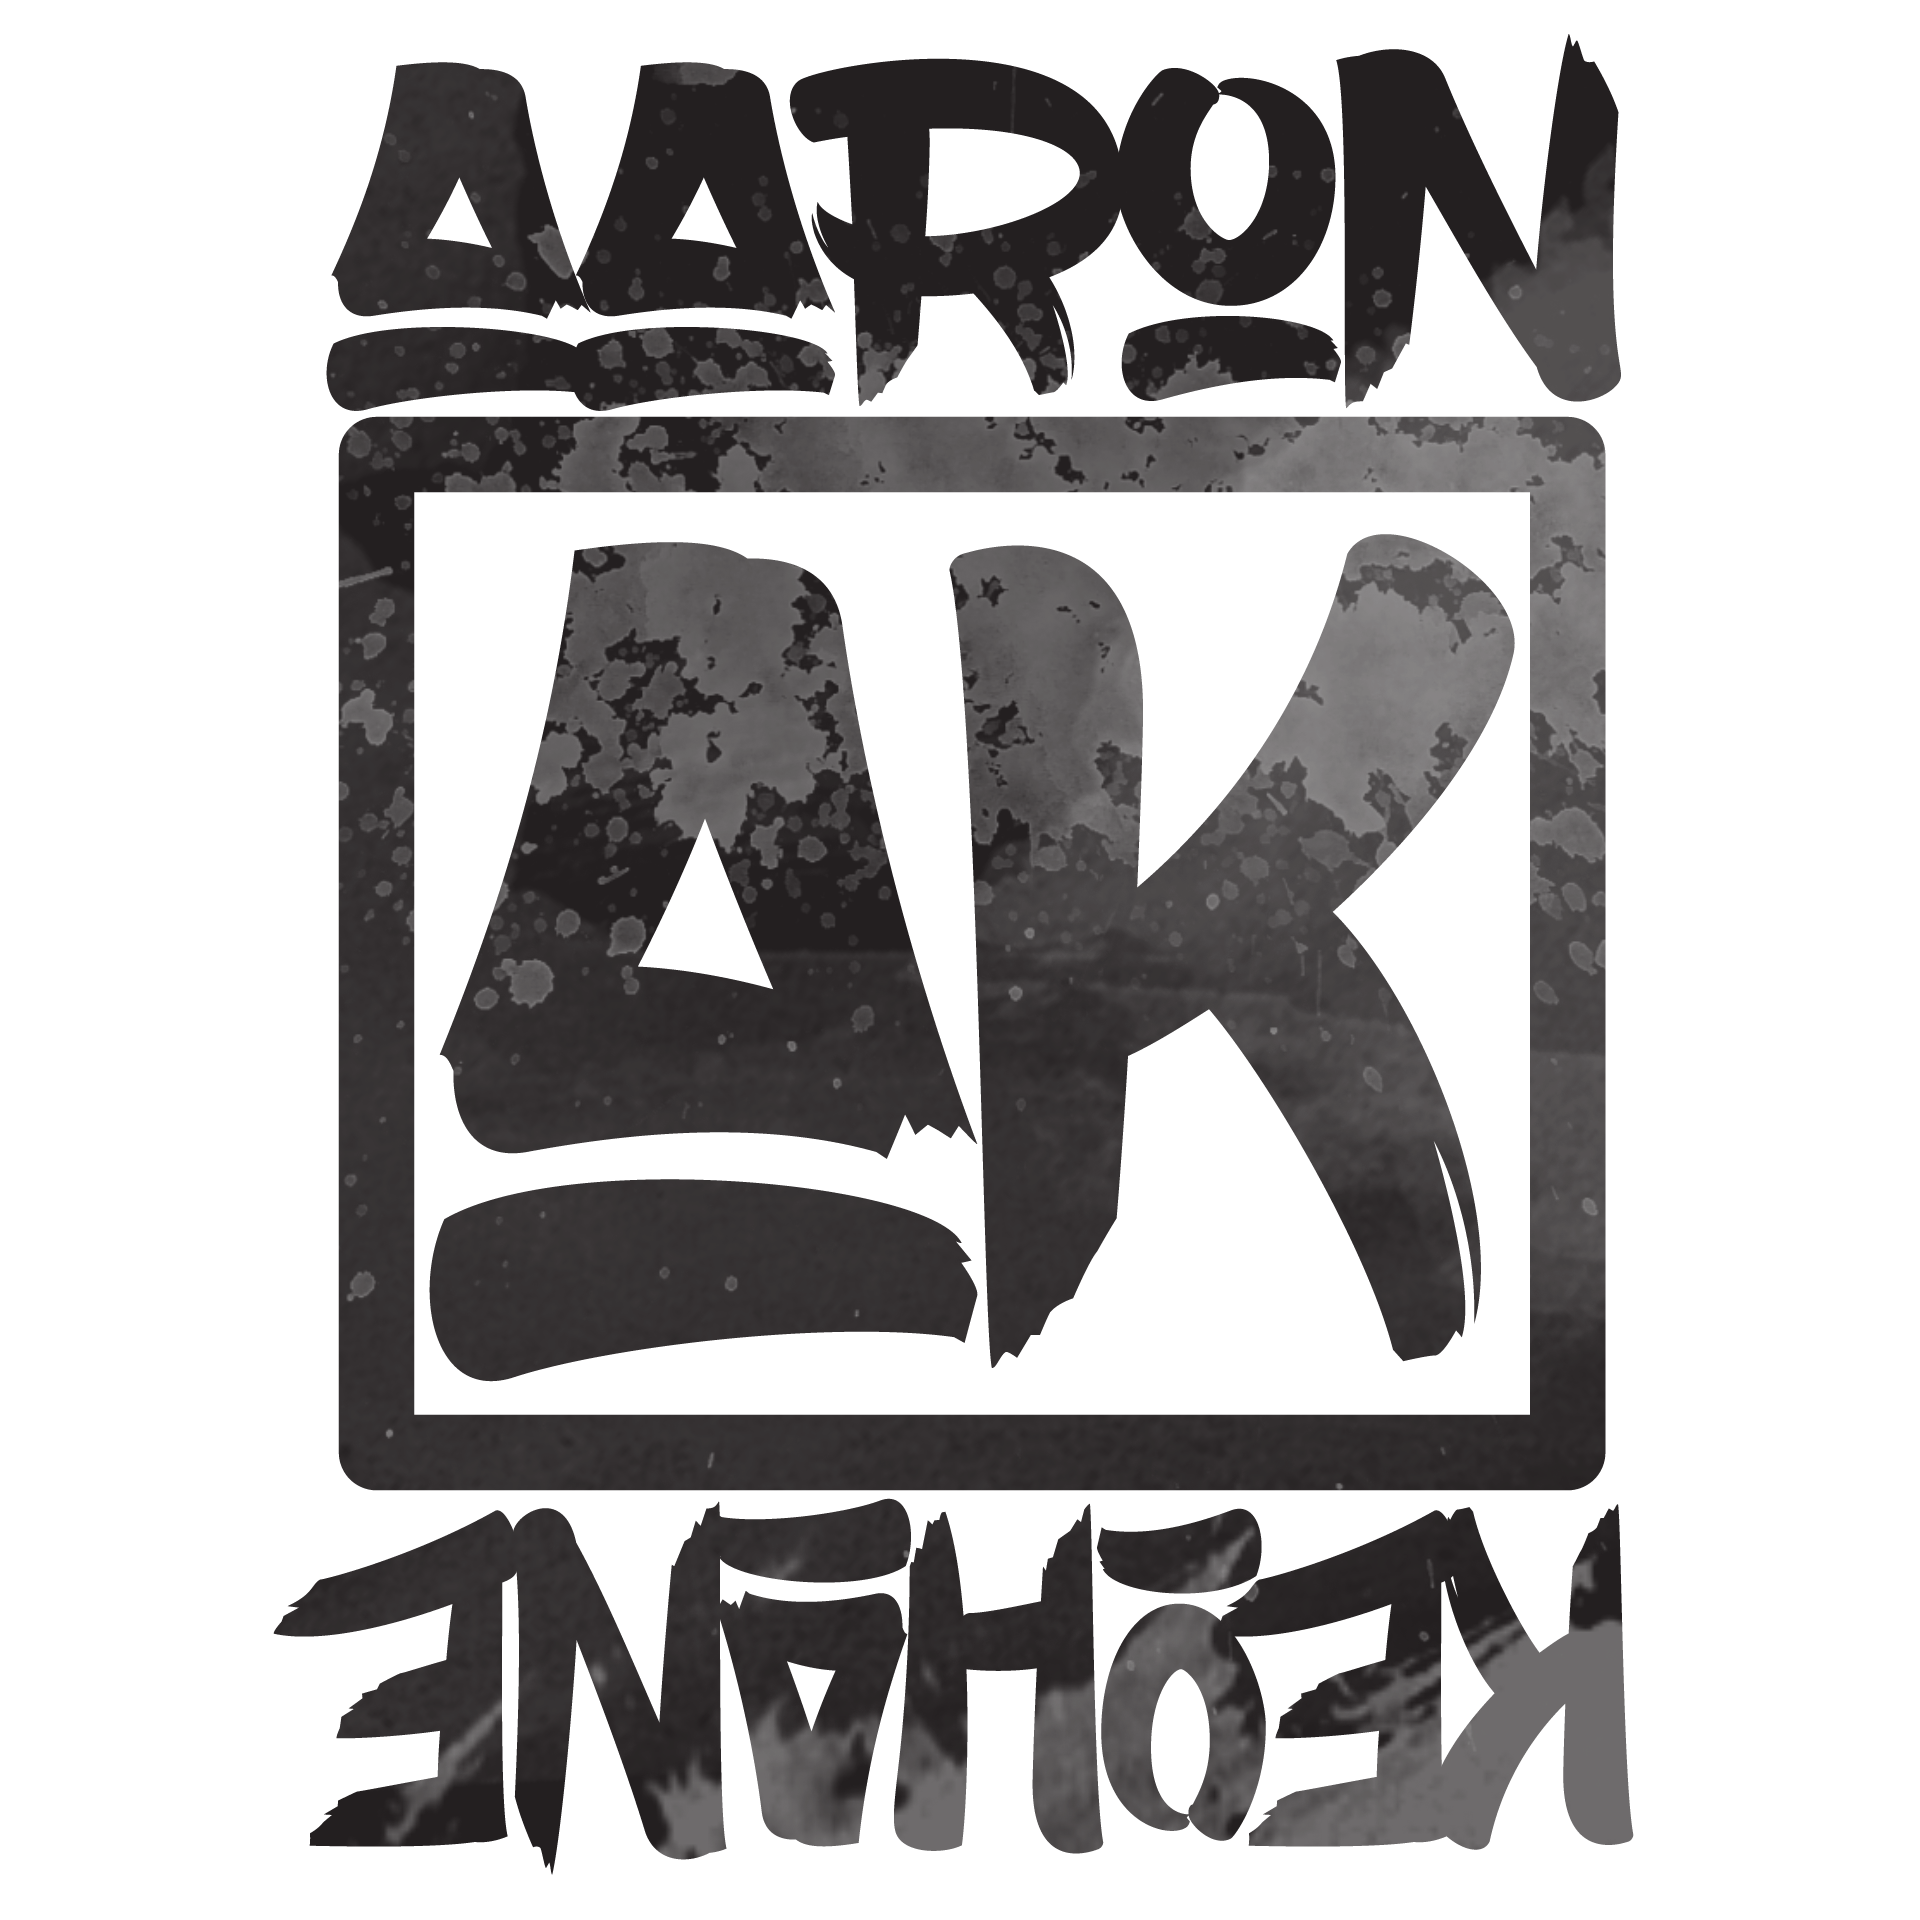 Personal logo of Aaron Keohane, stylized text with capital initials in box